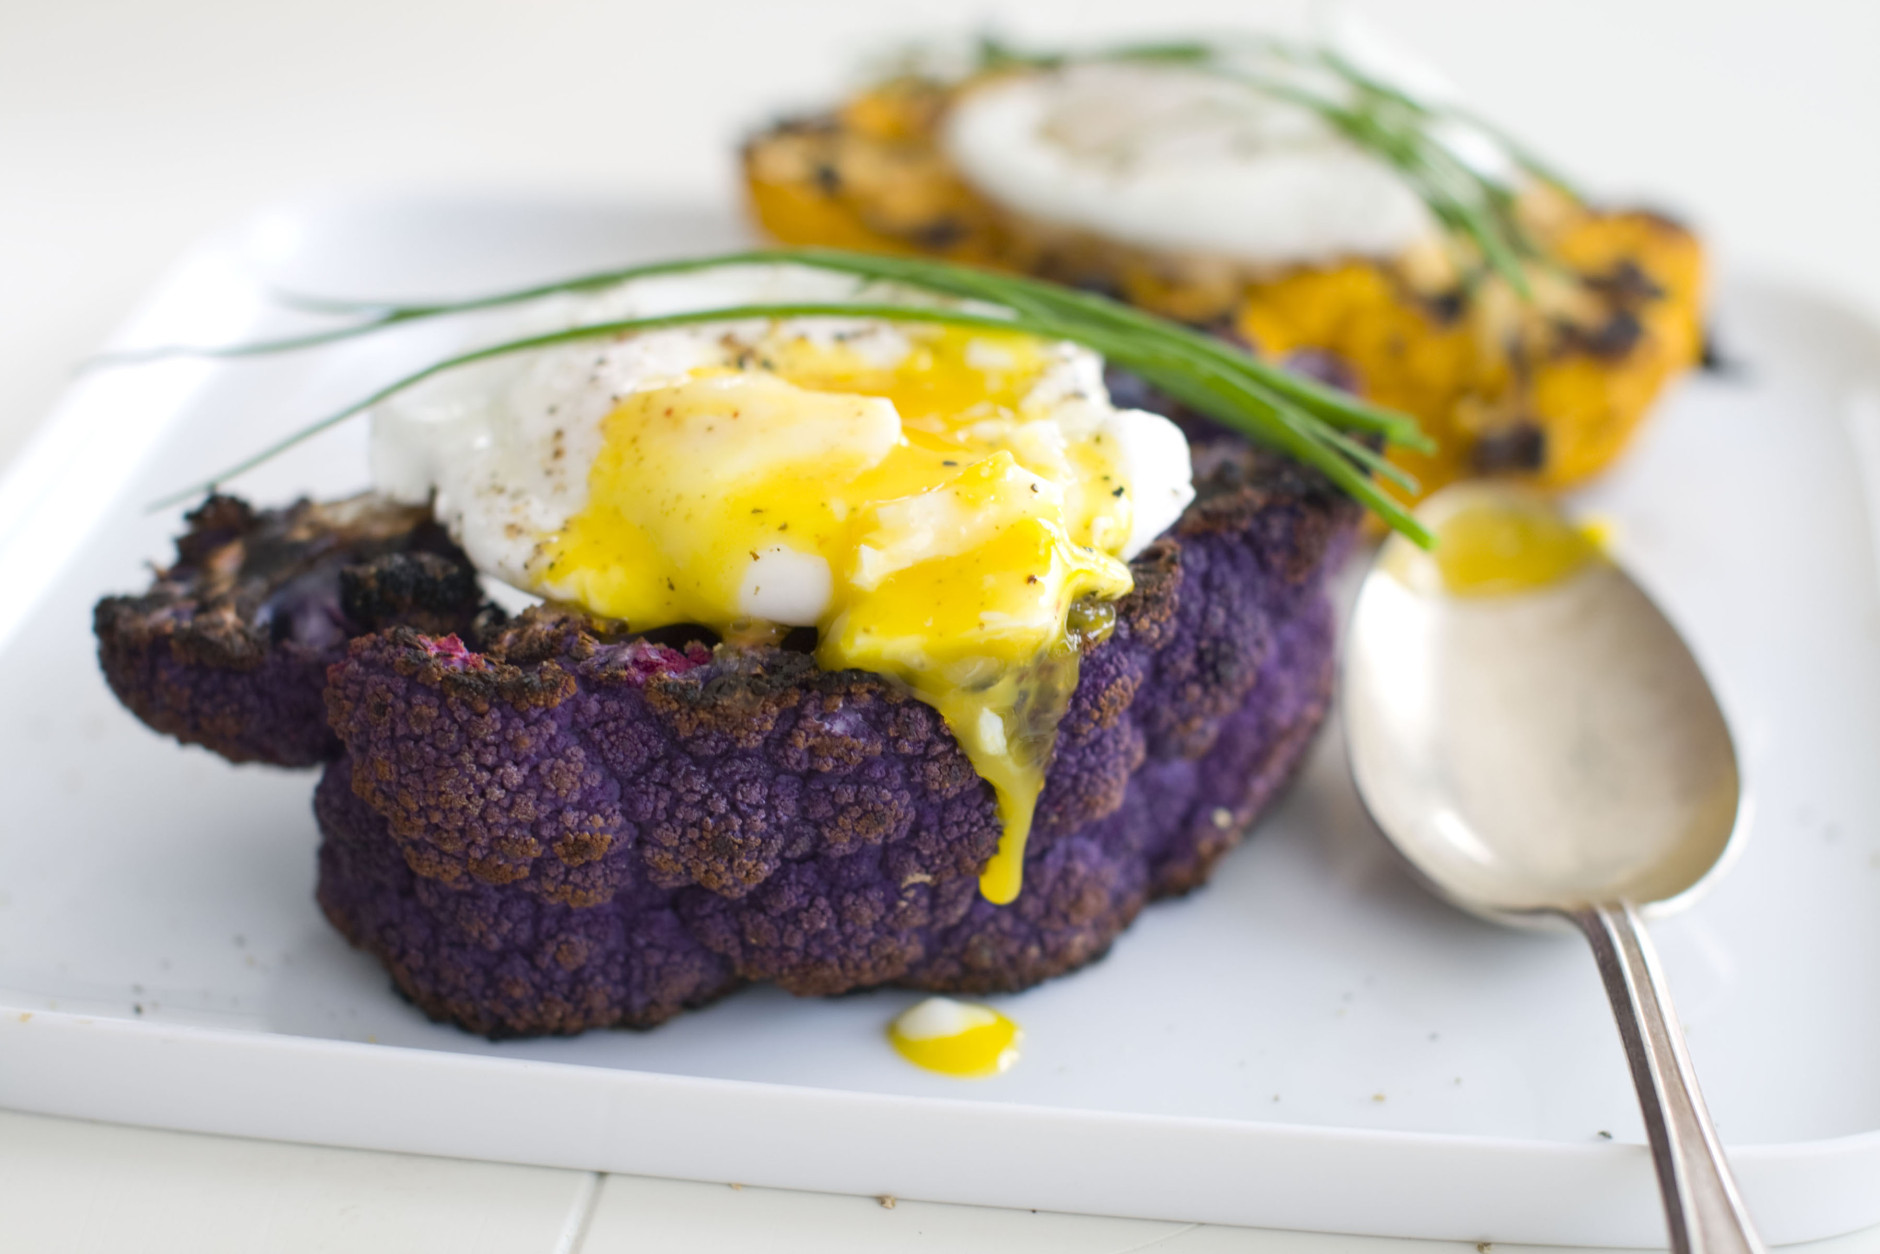 A purple cauliflower with poached eggs and truffle oil is shown. (AP Photo/Matthew Mead)